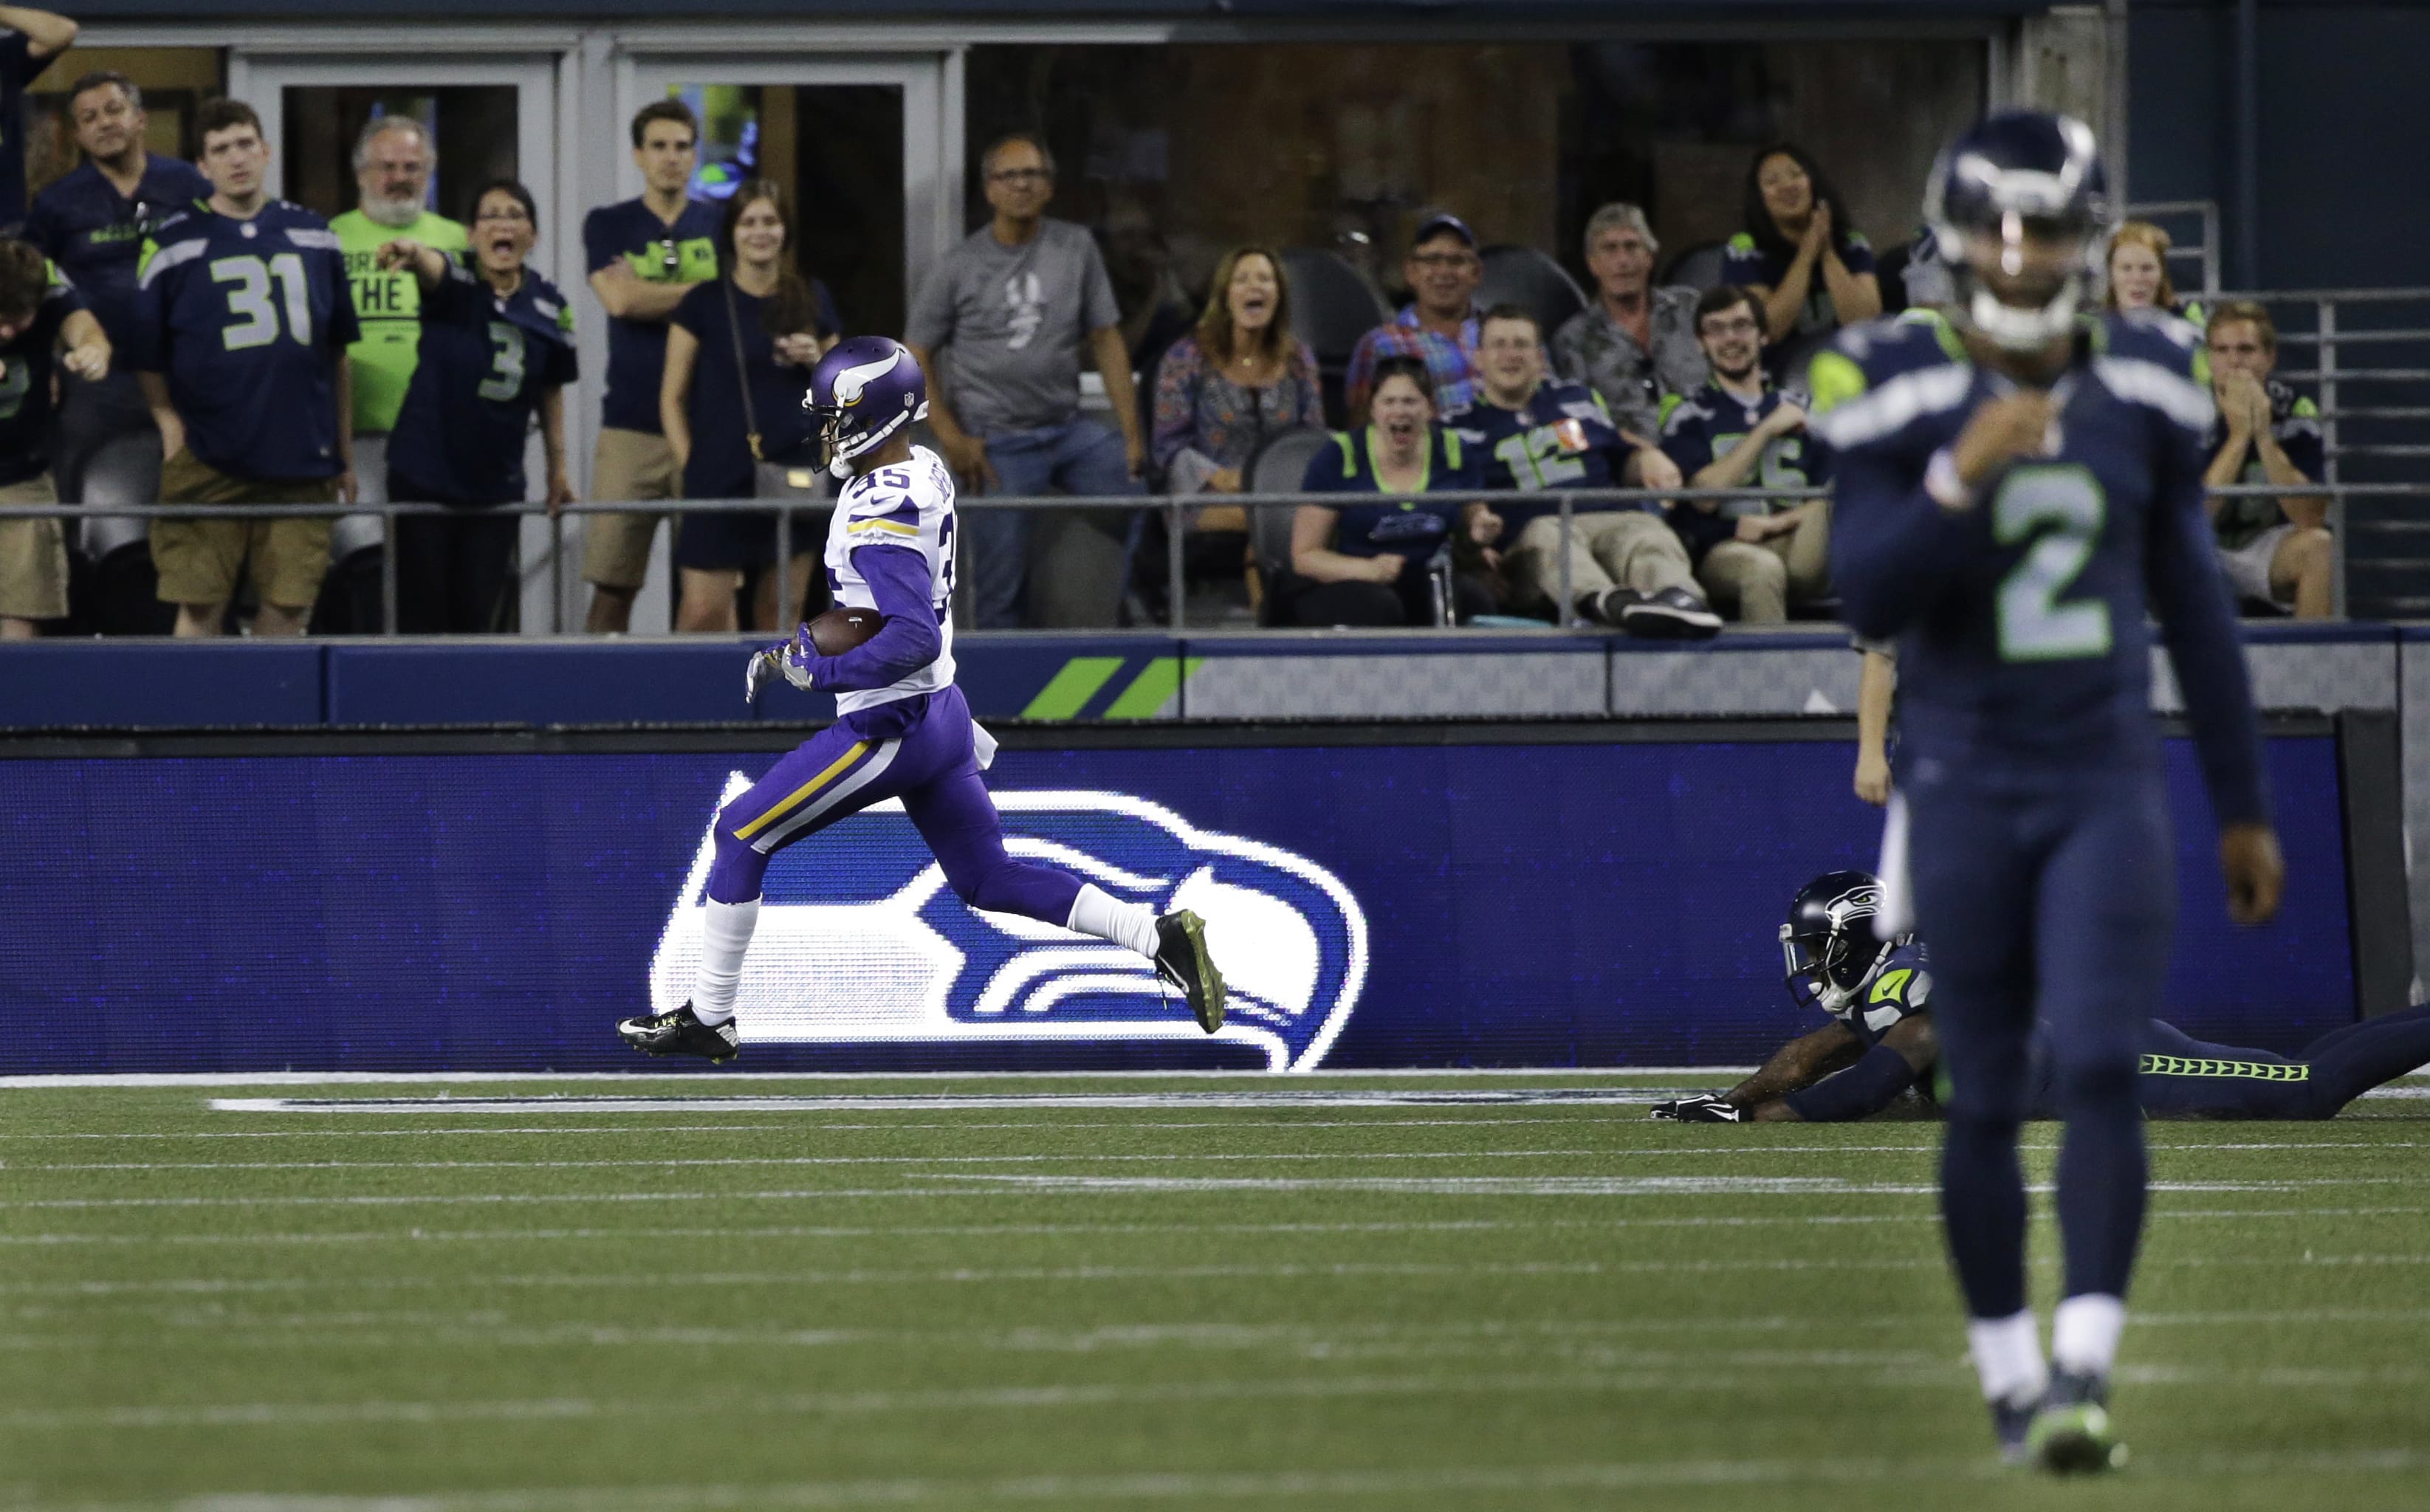 Minnesota Vikings cornerback Marcus Sherels, left, scores the go-ahead touchdown after he intercepted a pass from Seattle Seahawks quarterback Trevone Boykin, right, during the second half of a preseason NFL football game, Thursday, Aug. 18, 2016, in Seattle. The Vikings won 18-11.